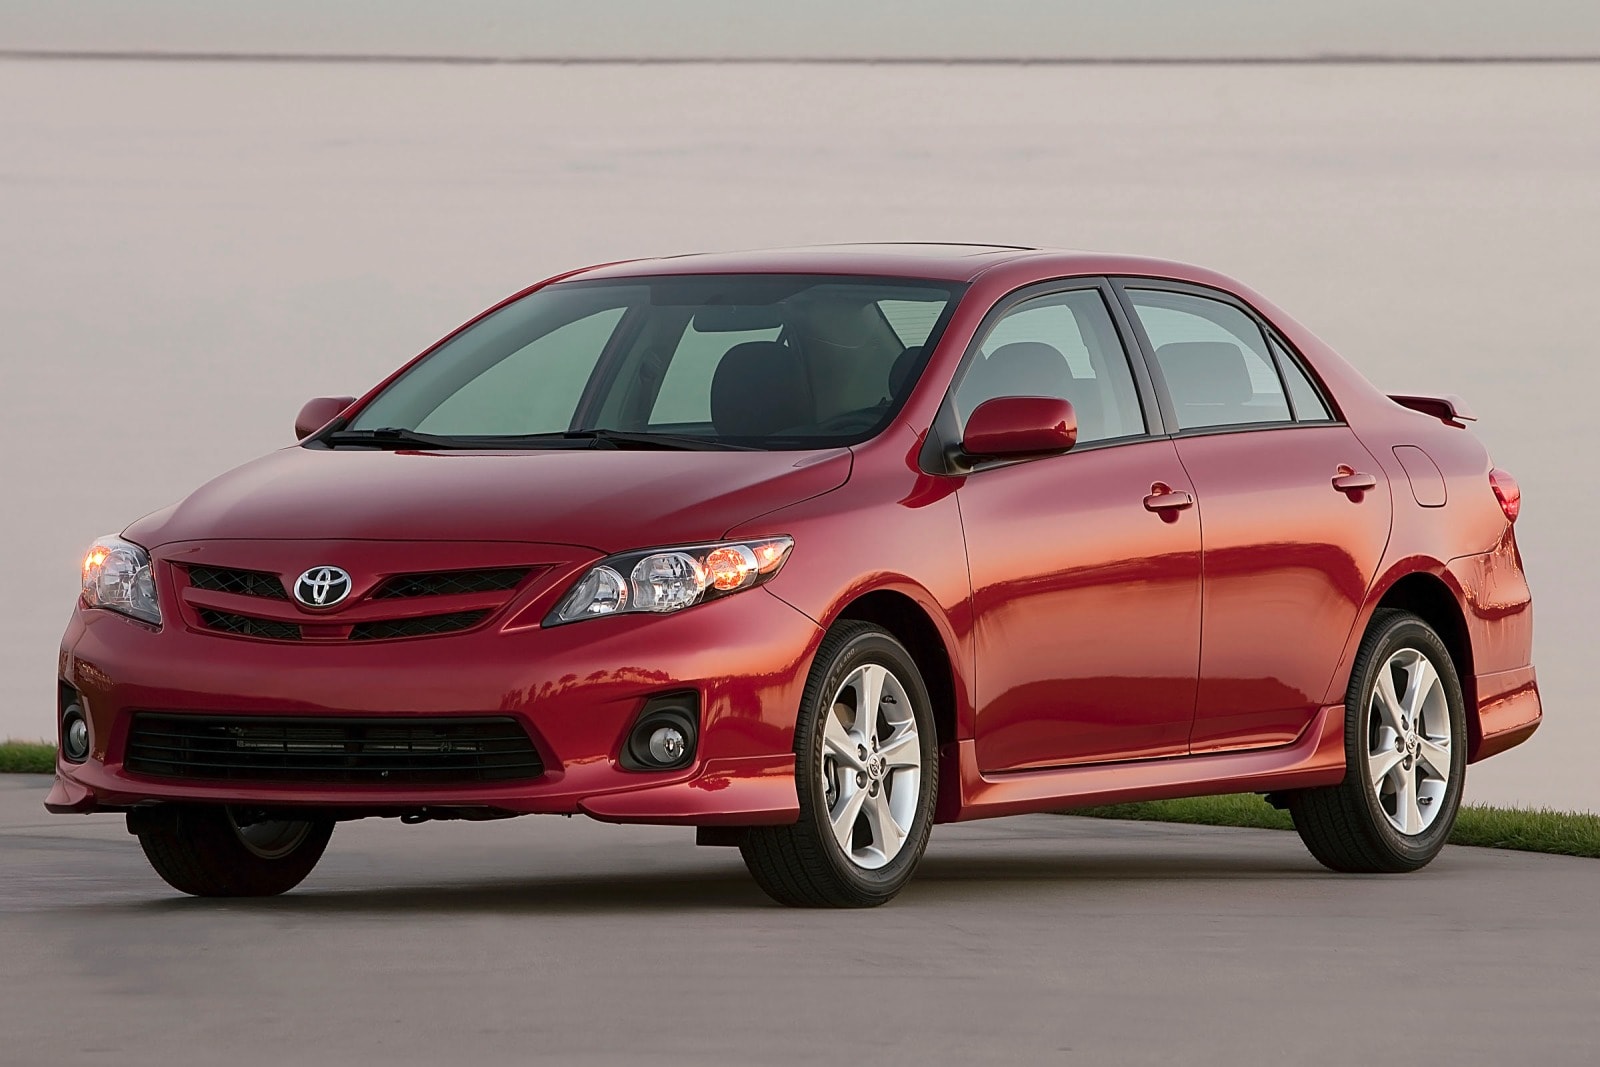 2013 Toyota Corolla Review & Ratings | Edmunds